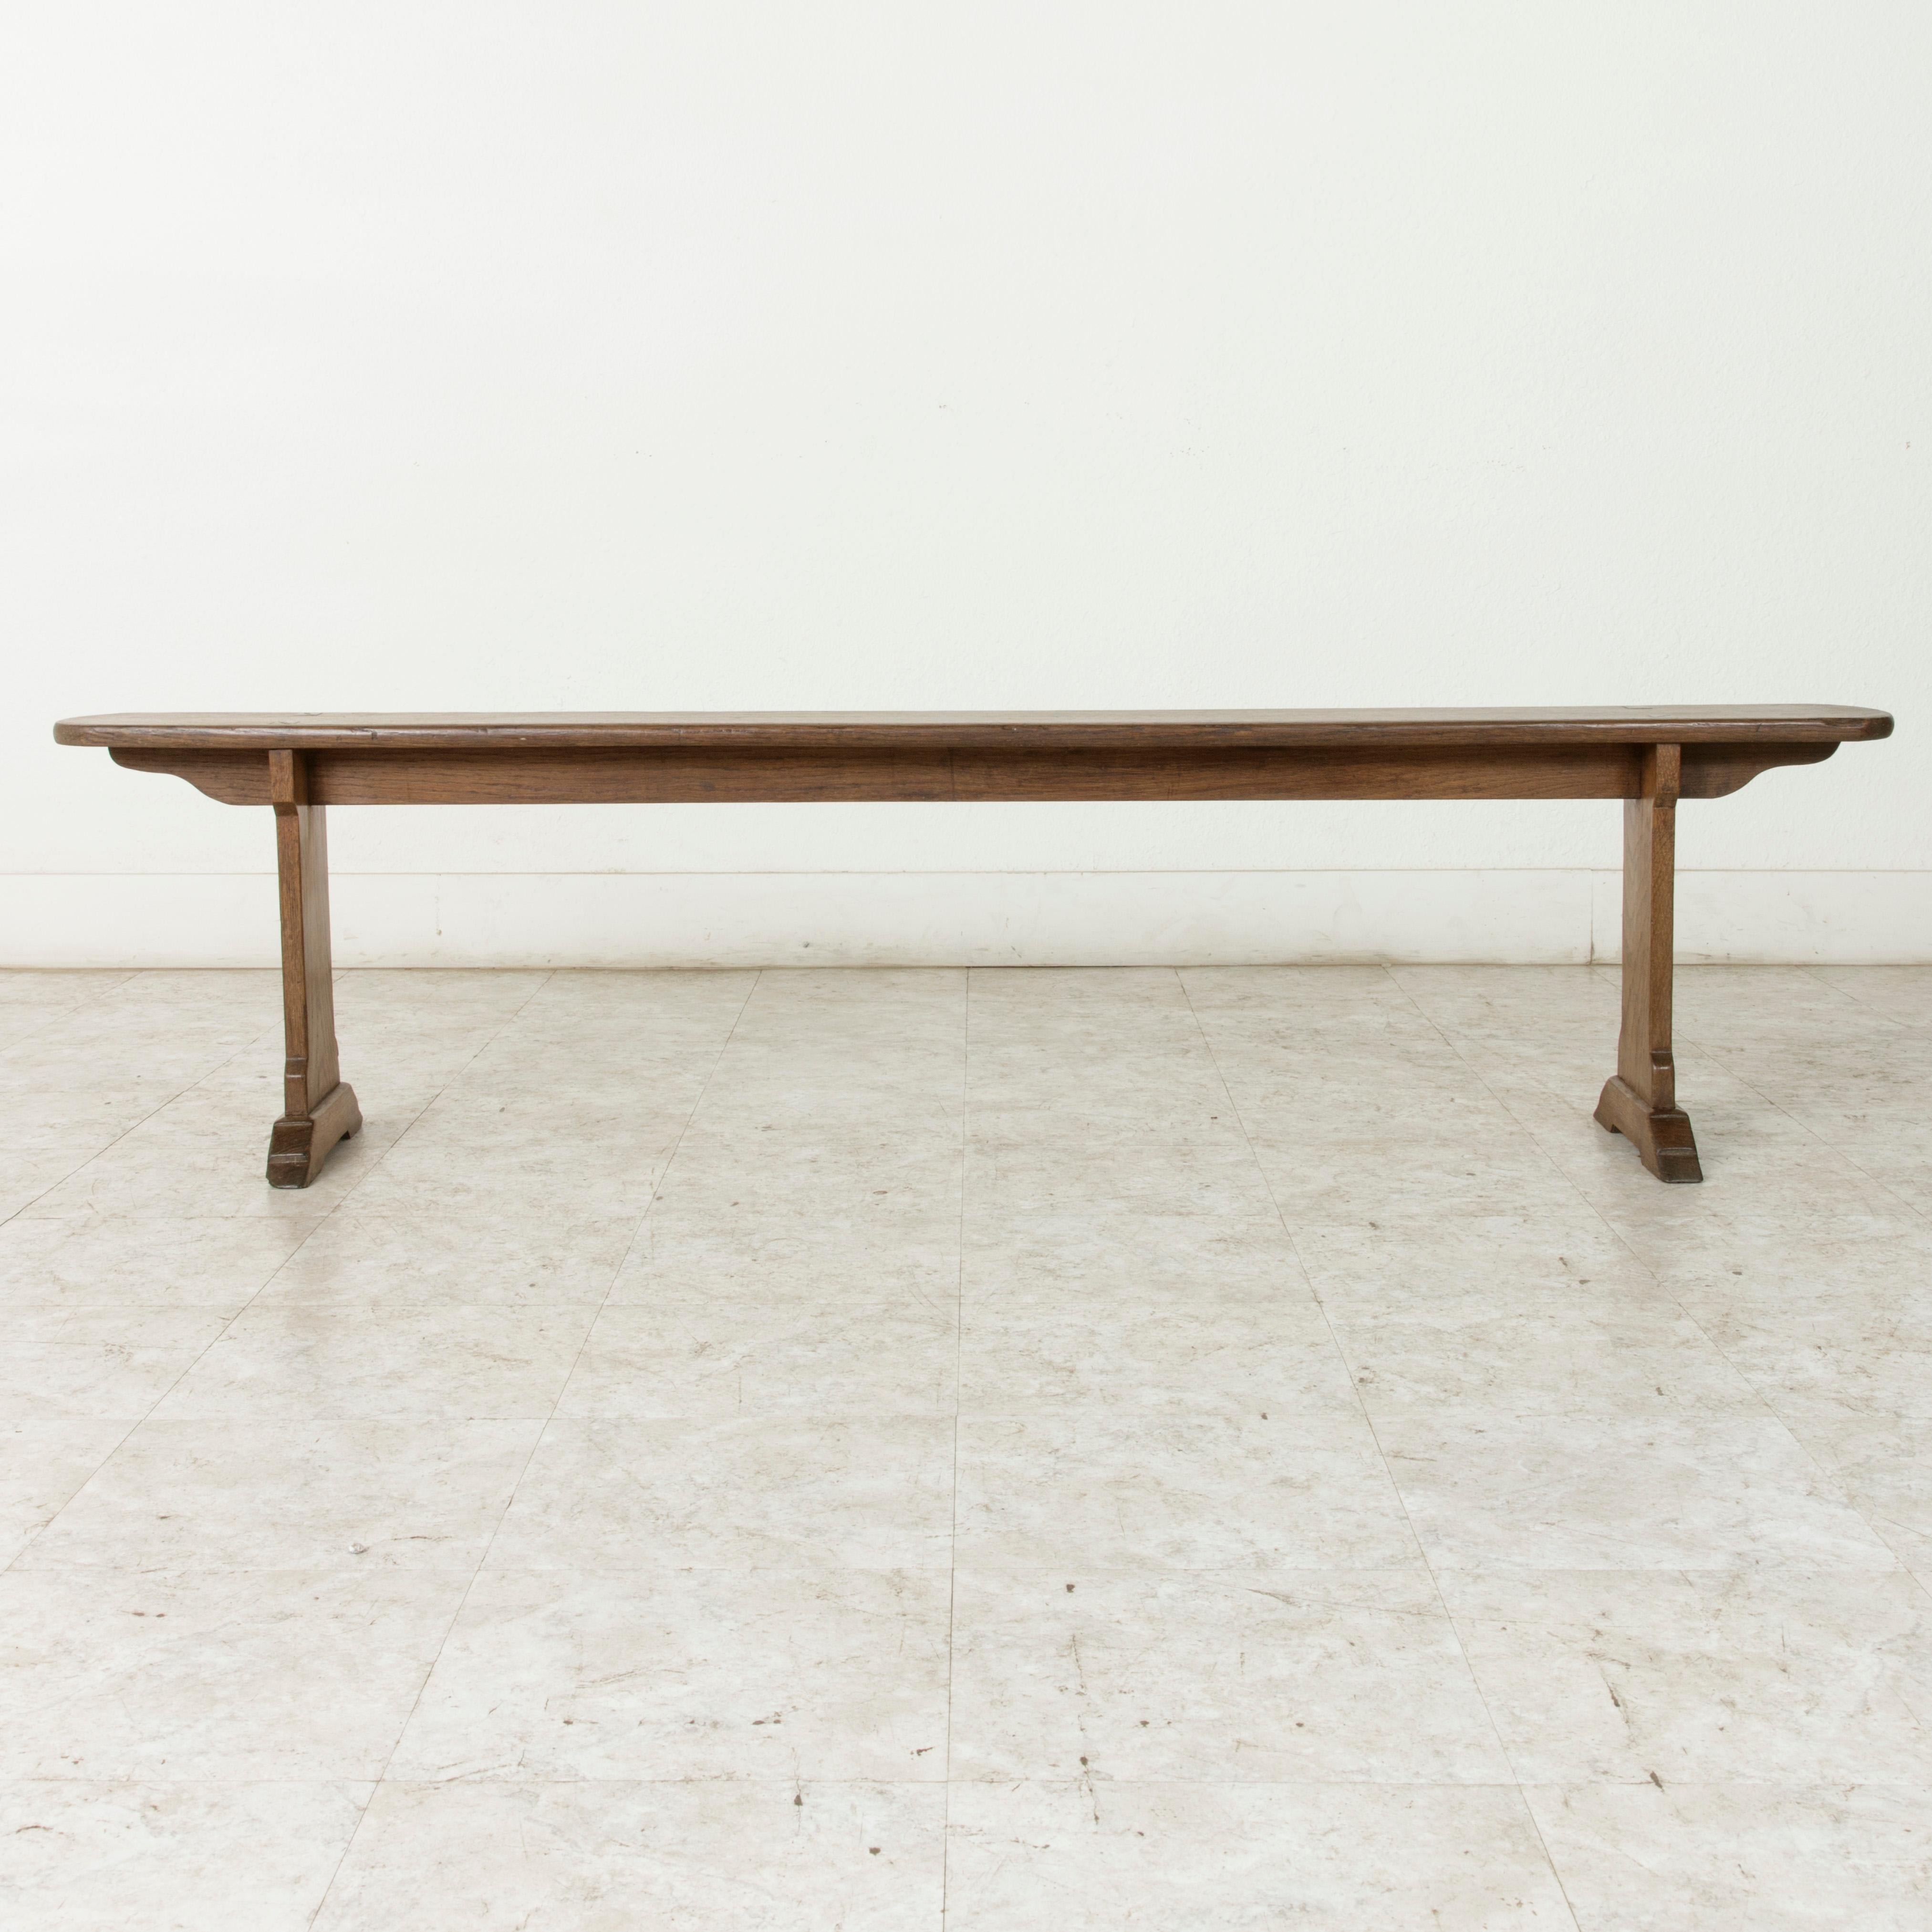 20th Century Pair of French Artisan Made Oak Farm Table Benches from Normandy, circa 1920